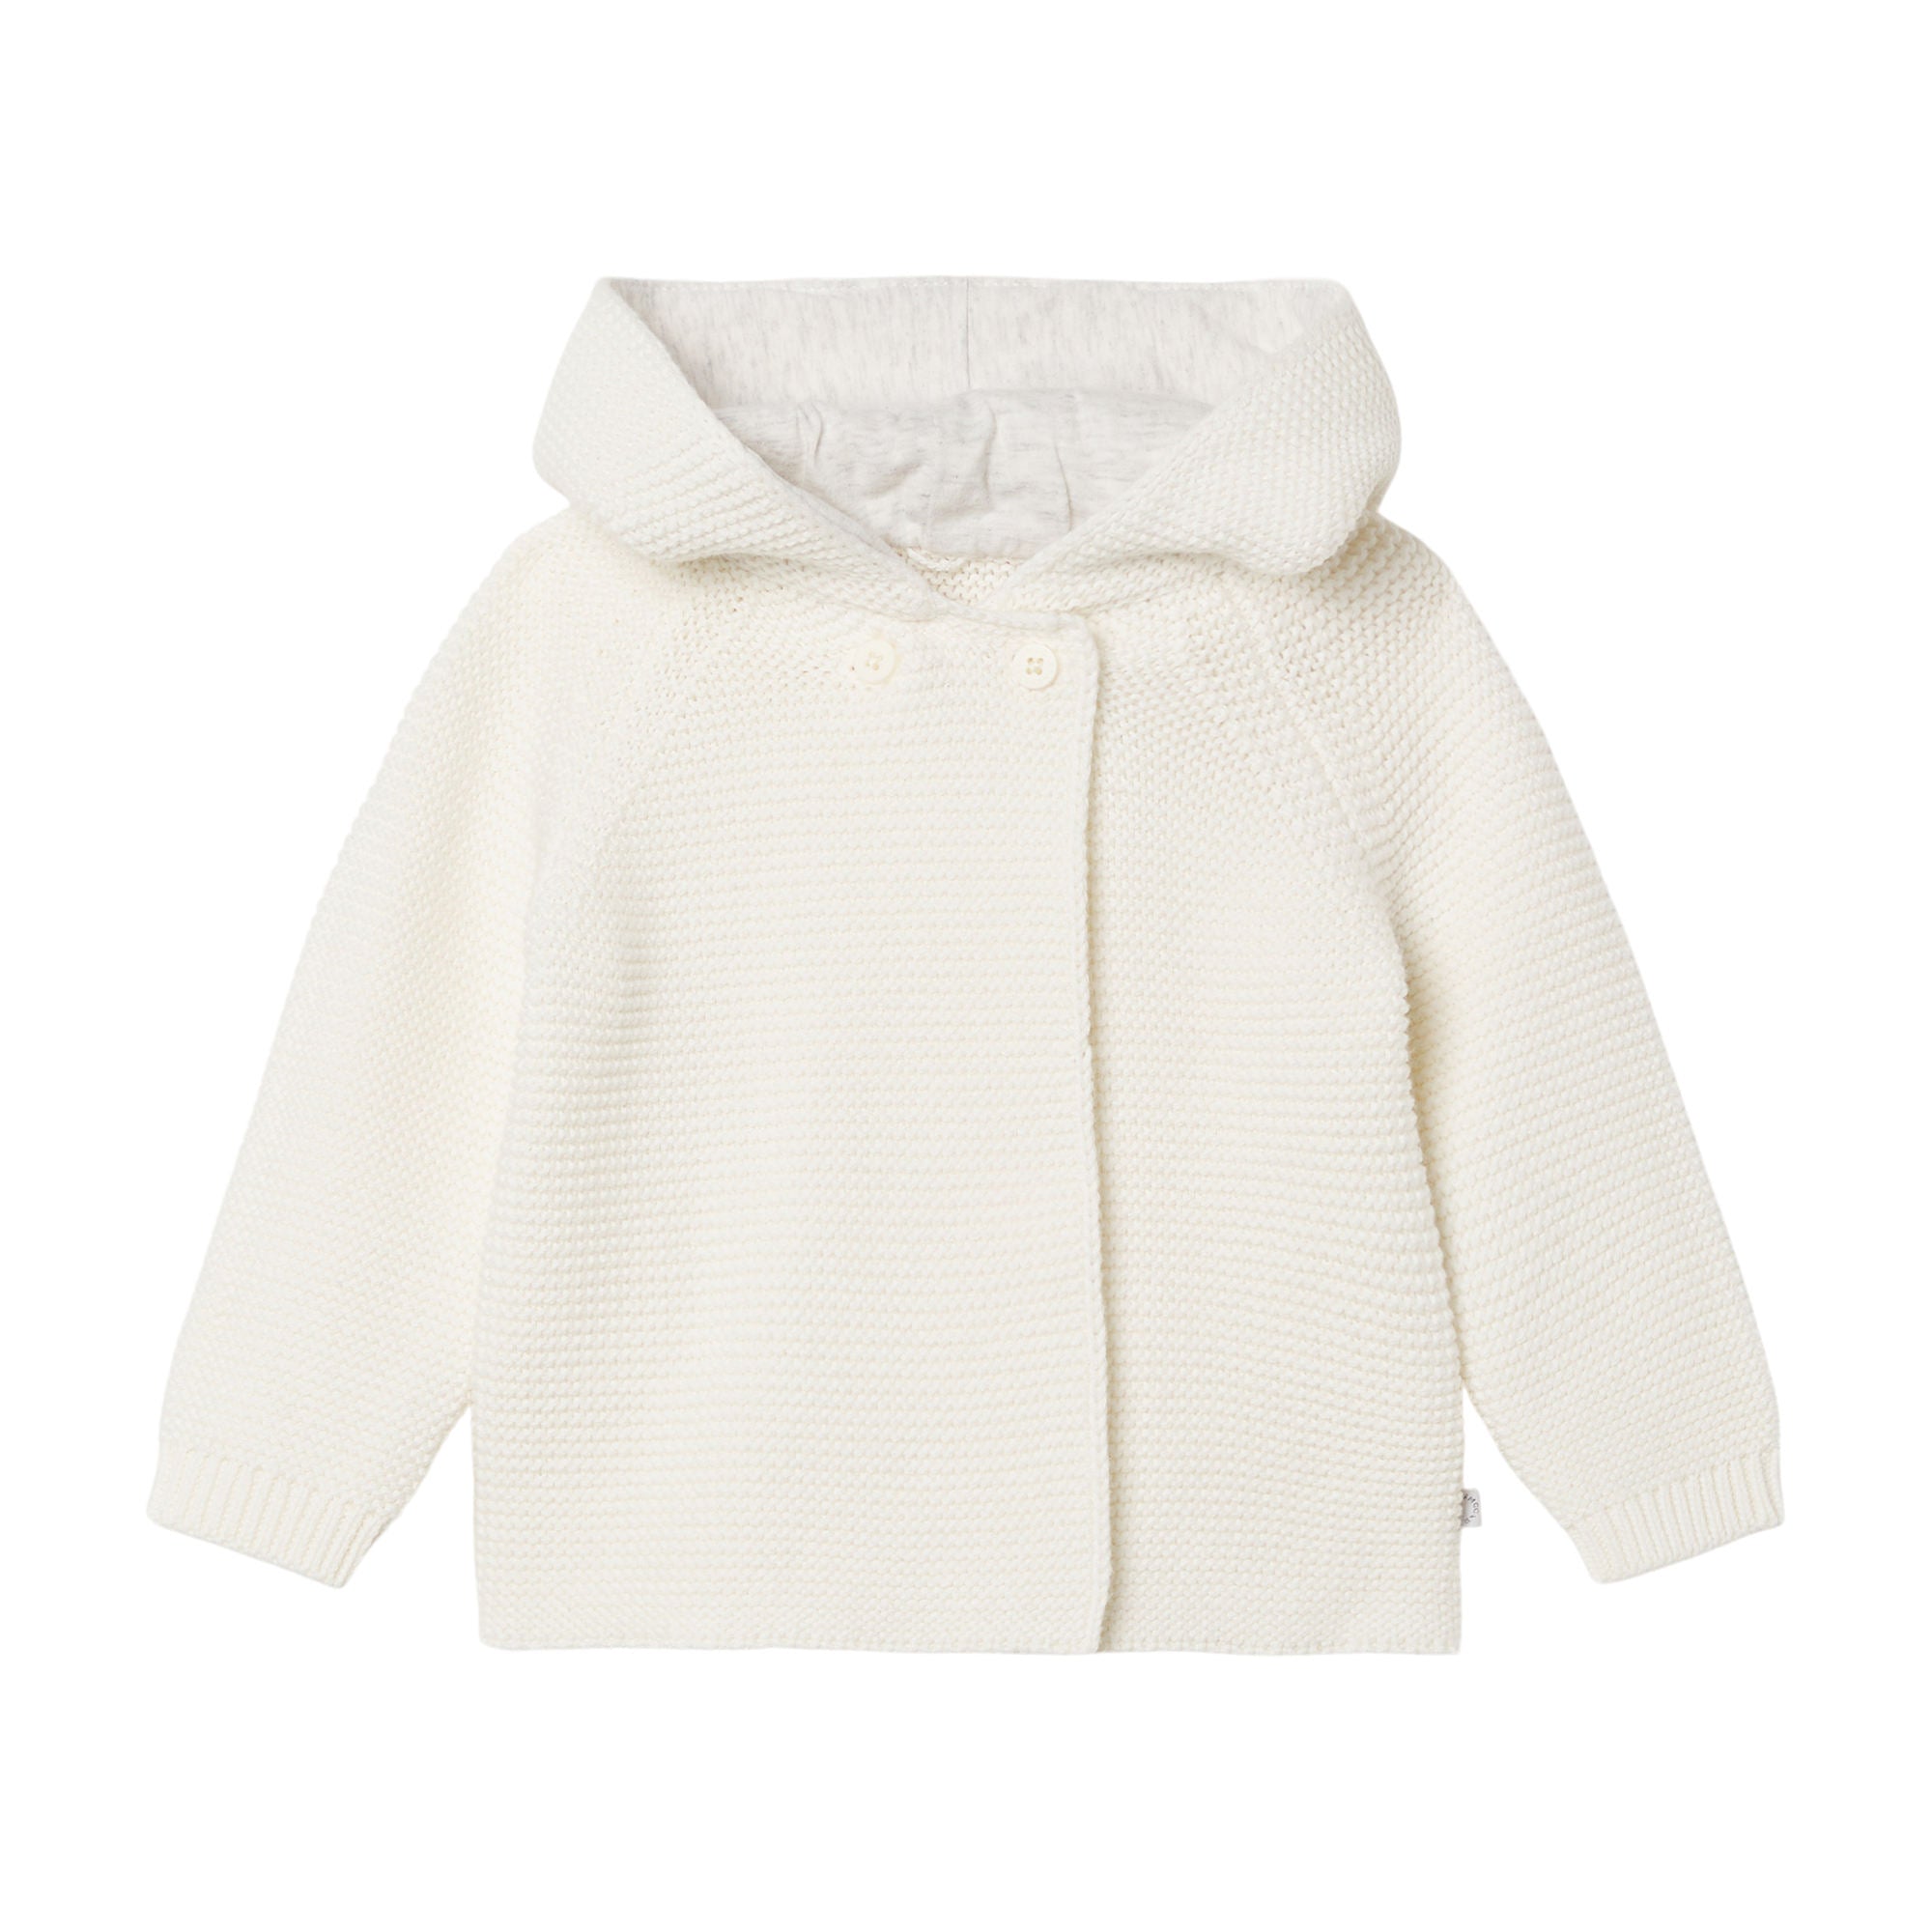 Stella McCartney White Baby Knit Cardigan With Bunny Ears